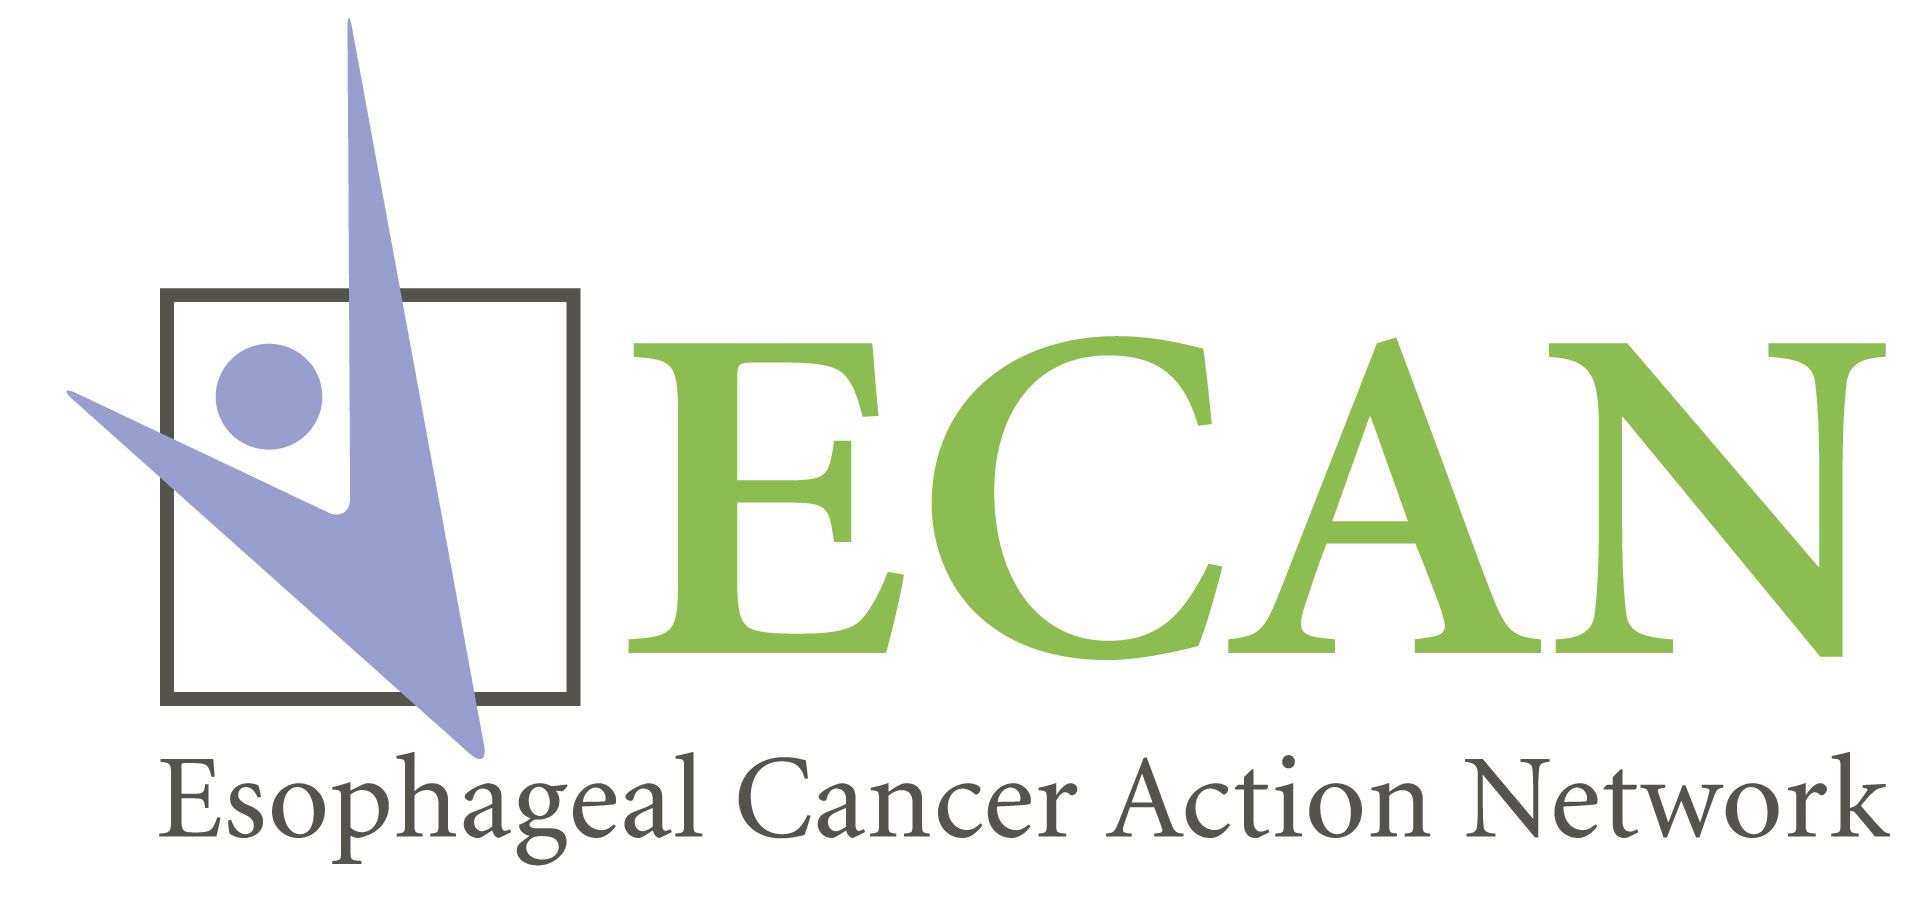 Esophageal Cancer Action Network